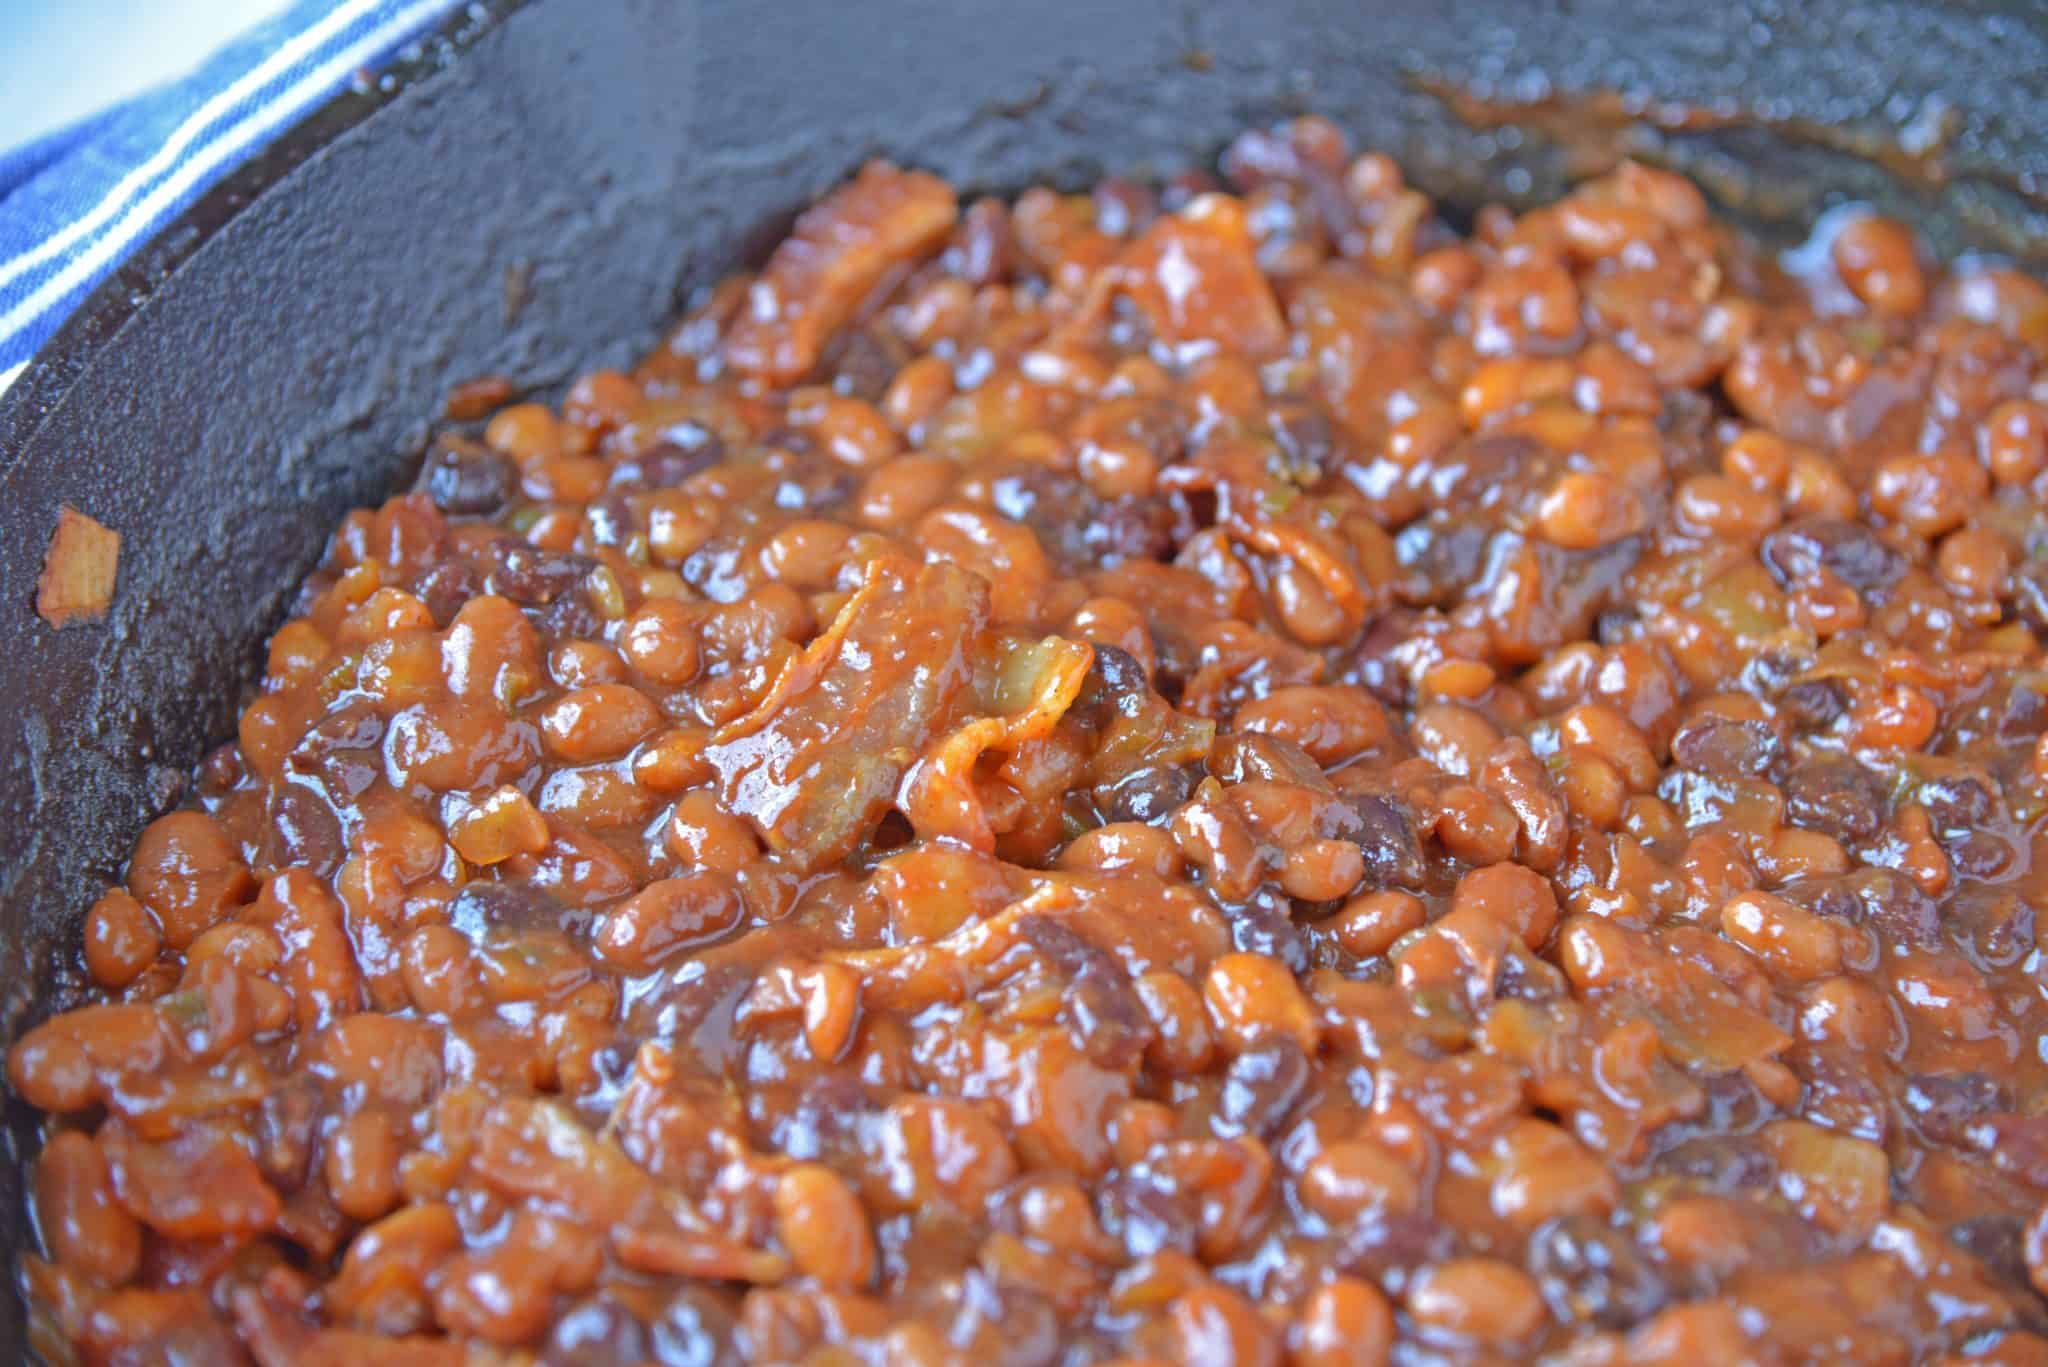 Cowboy Homemade Baked Beans are smoky, spicy and sweet. The perfect side dish recipe for BBQ, potlucks and parties. An easy baked bean recipe with loads of flavor! #homemadebakedbeans #bakedbeans www.savoryexperiments.com